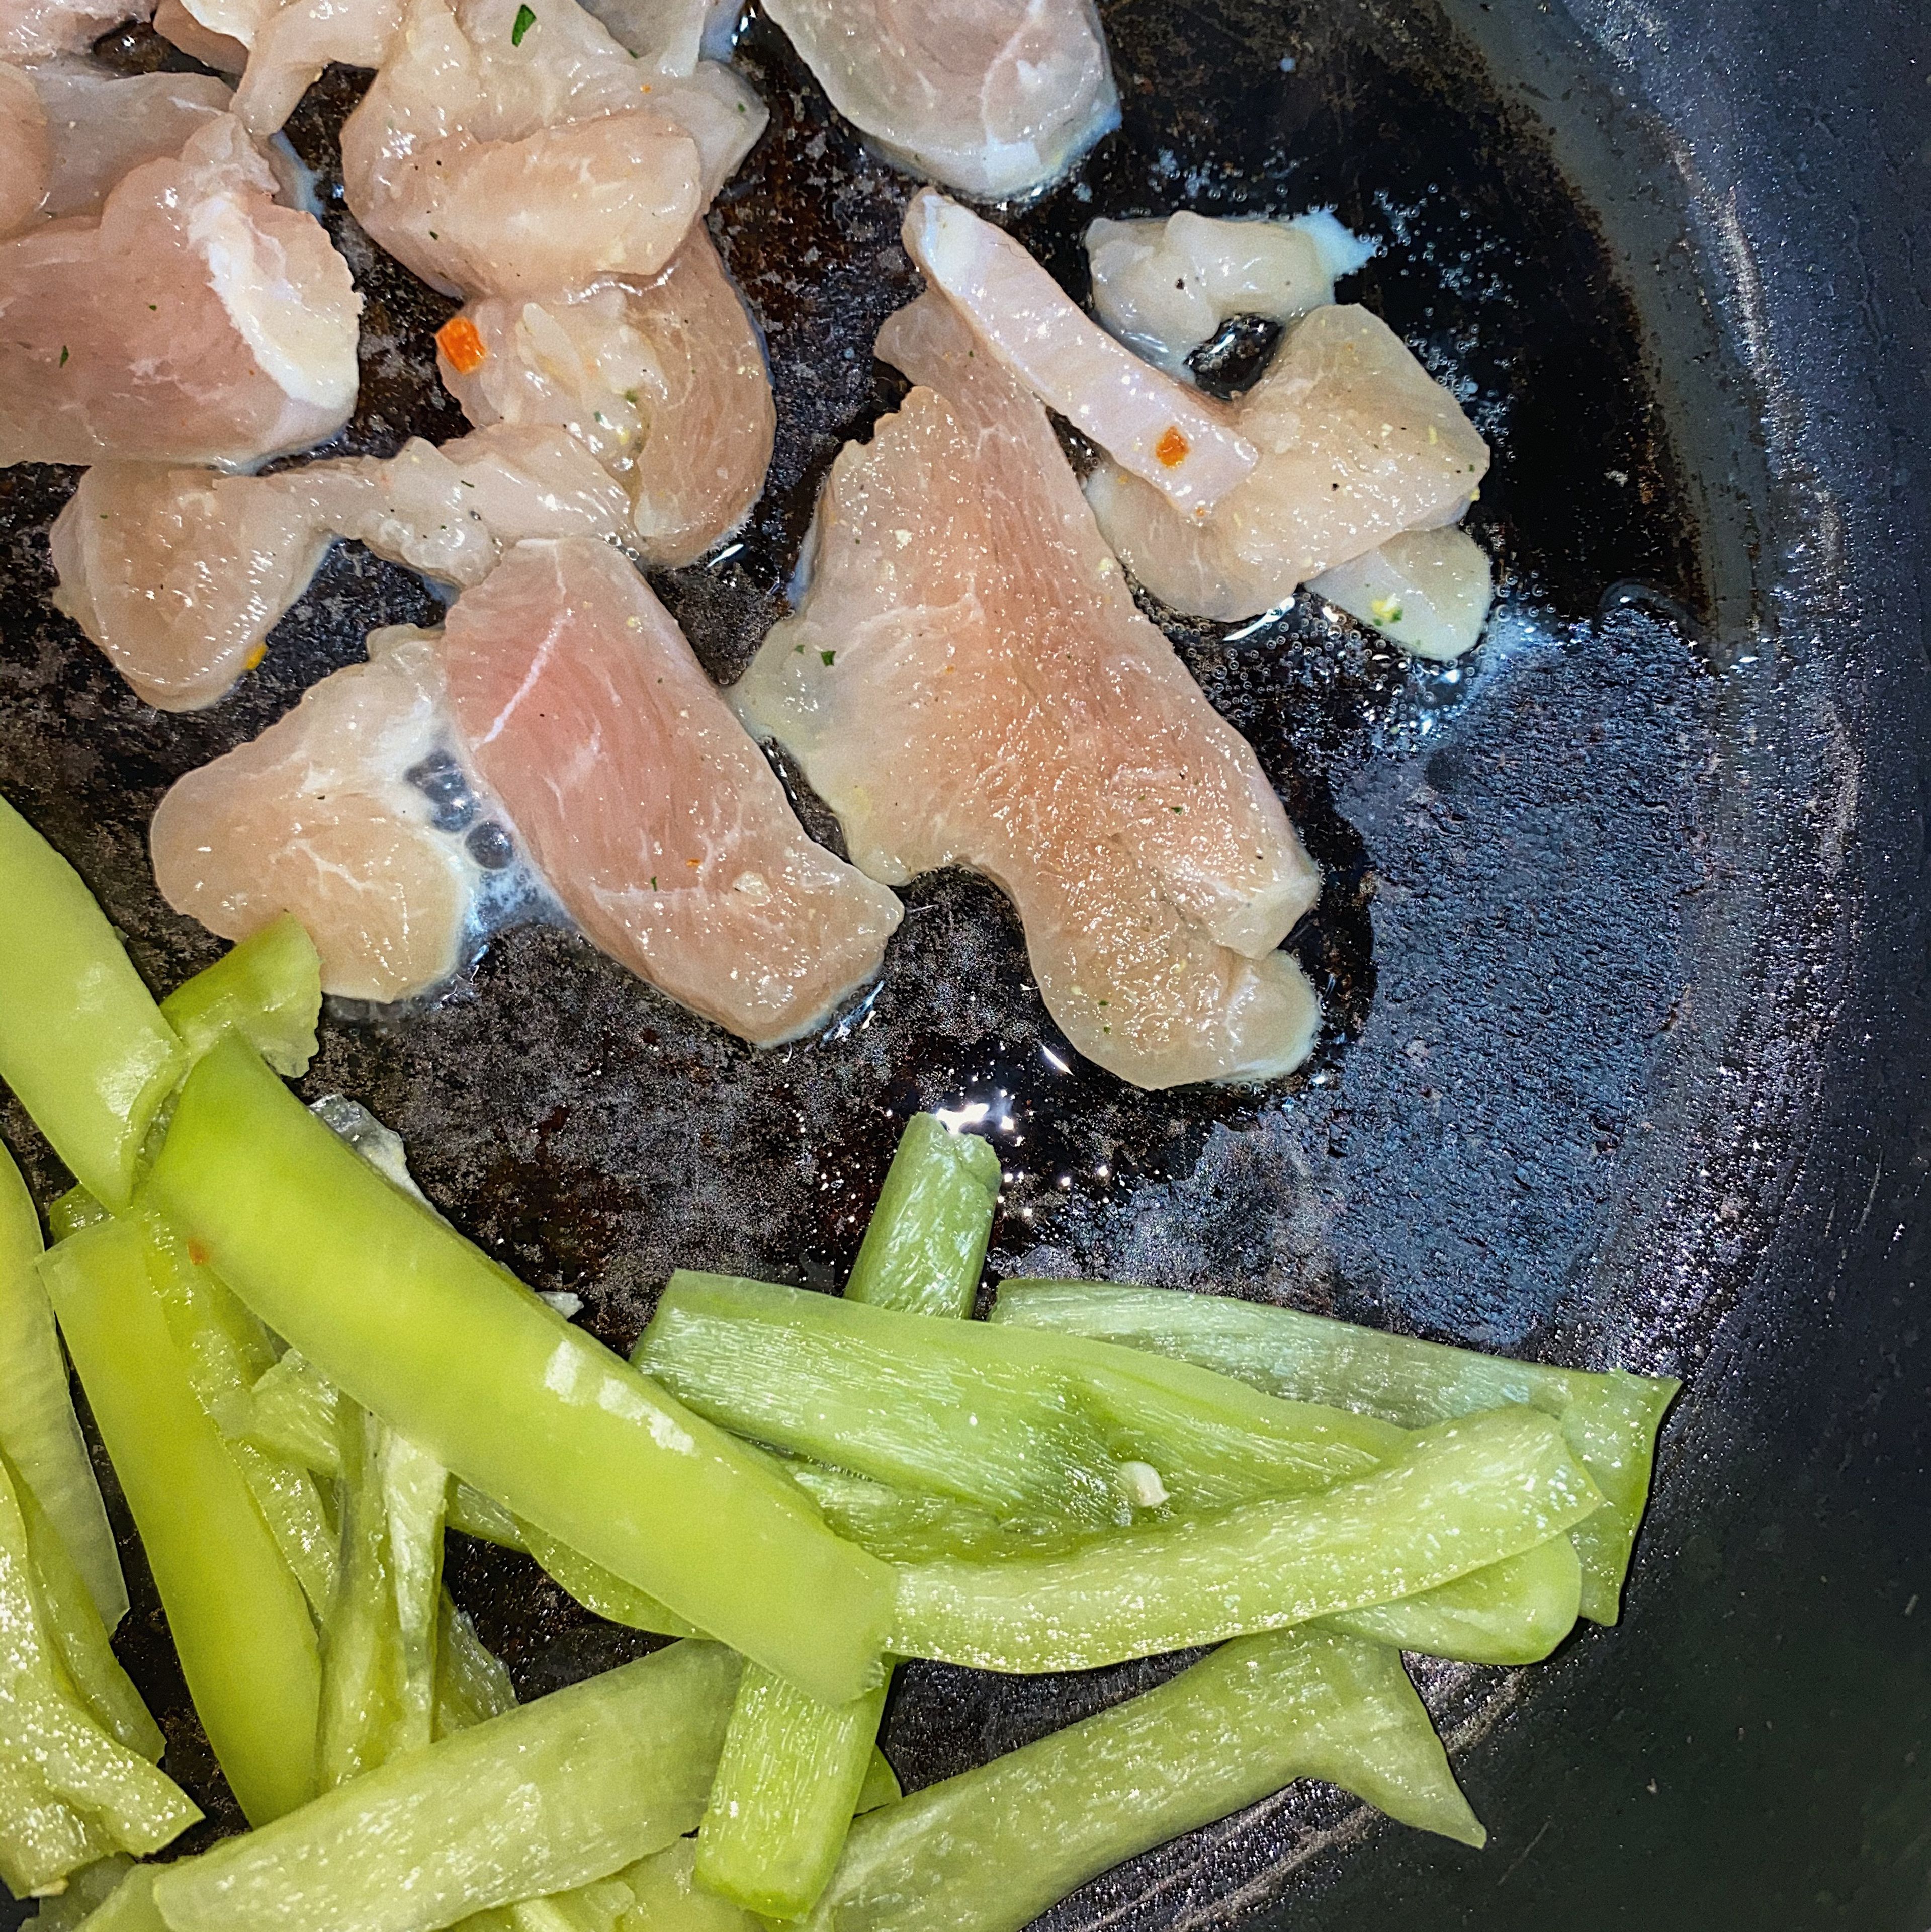 Turn your stove on the highest setting add olive oil in your frying pan and add the chicken and pepper